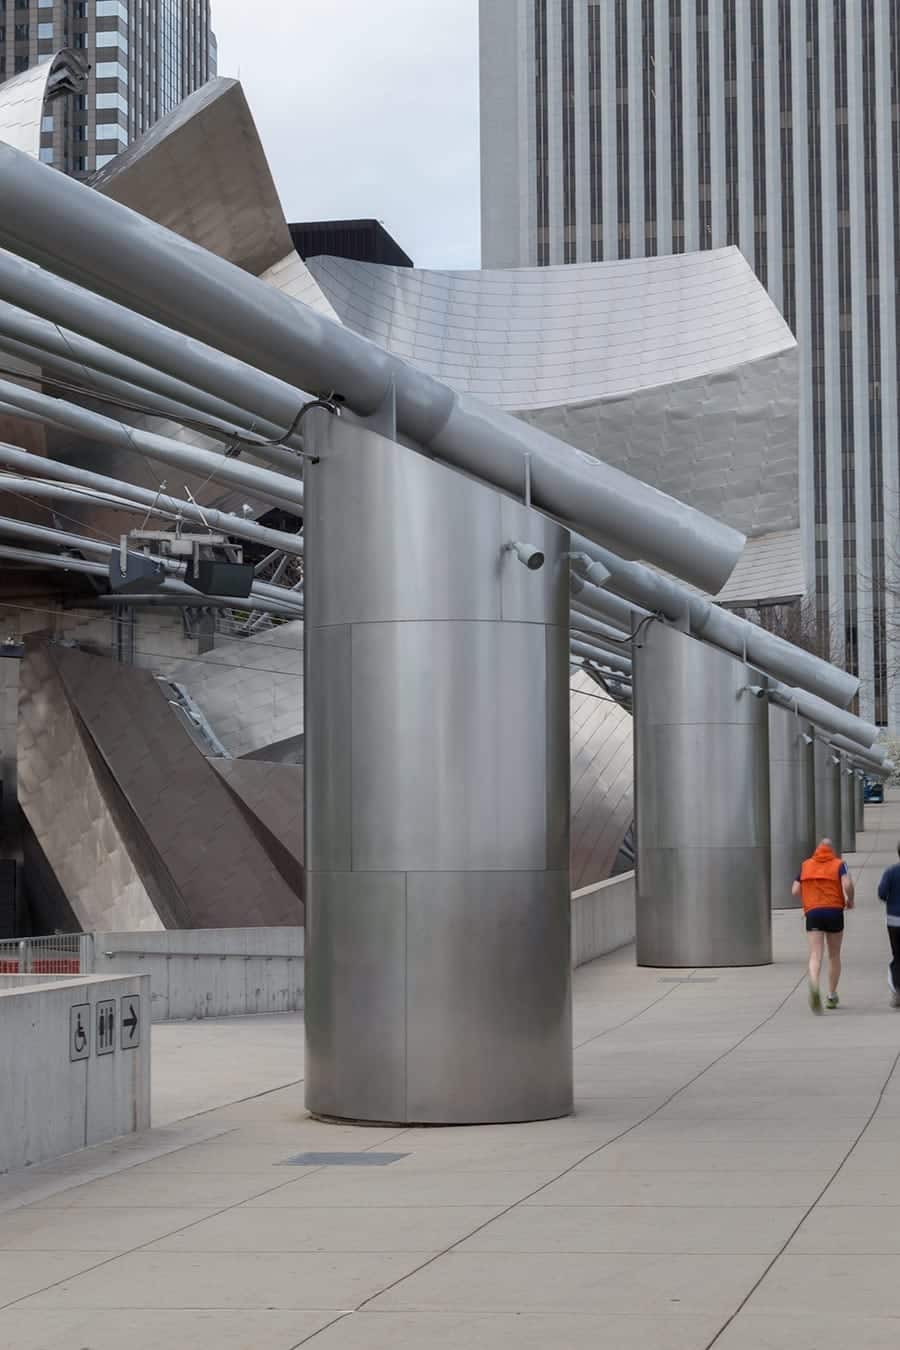 Zahner also produced the six-feet-diameter column cladding which encircle the perimeter of the Millennium park.